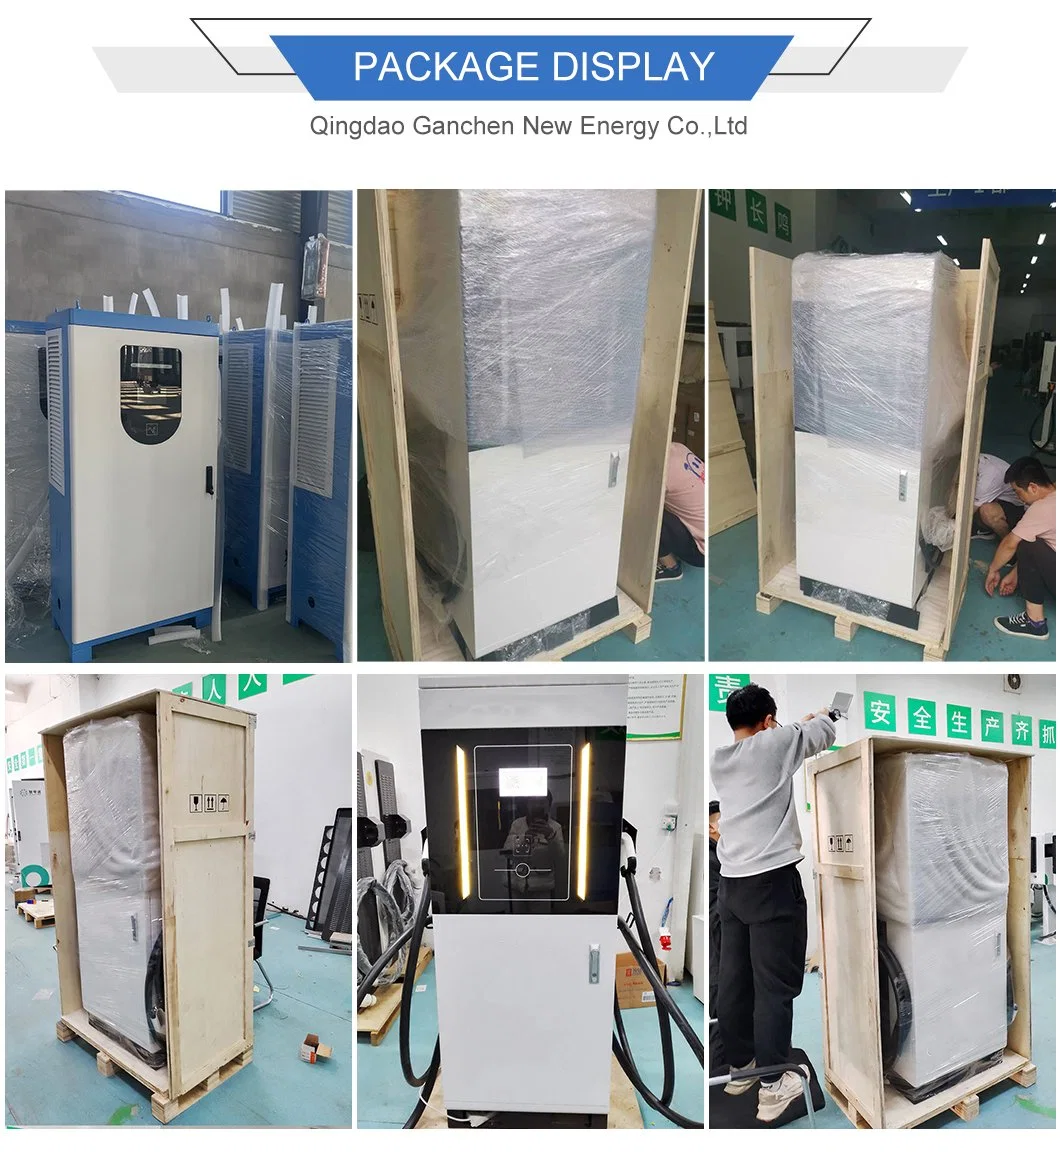 CCS1 CCS2 EV Charger Electric Vehicle Charging Pile Manufacturer 60kw 120kw 160kw 180kw 240kw 380V DC EV Charging Stations with Two Guns